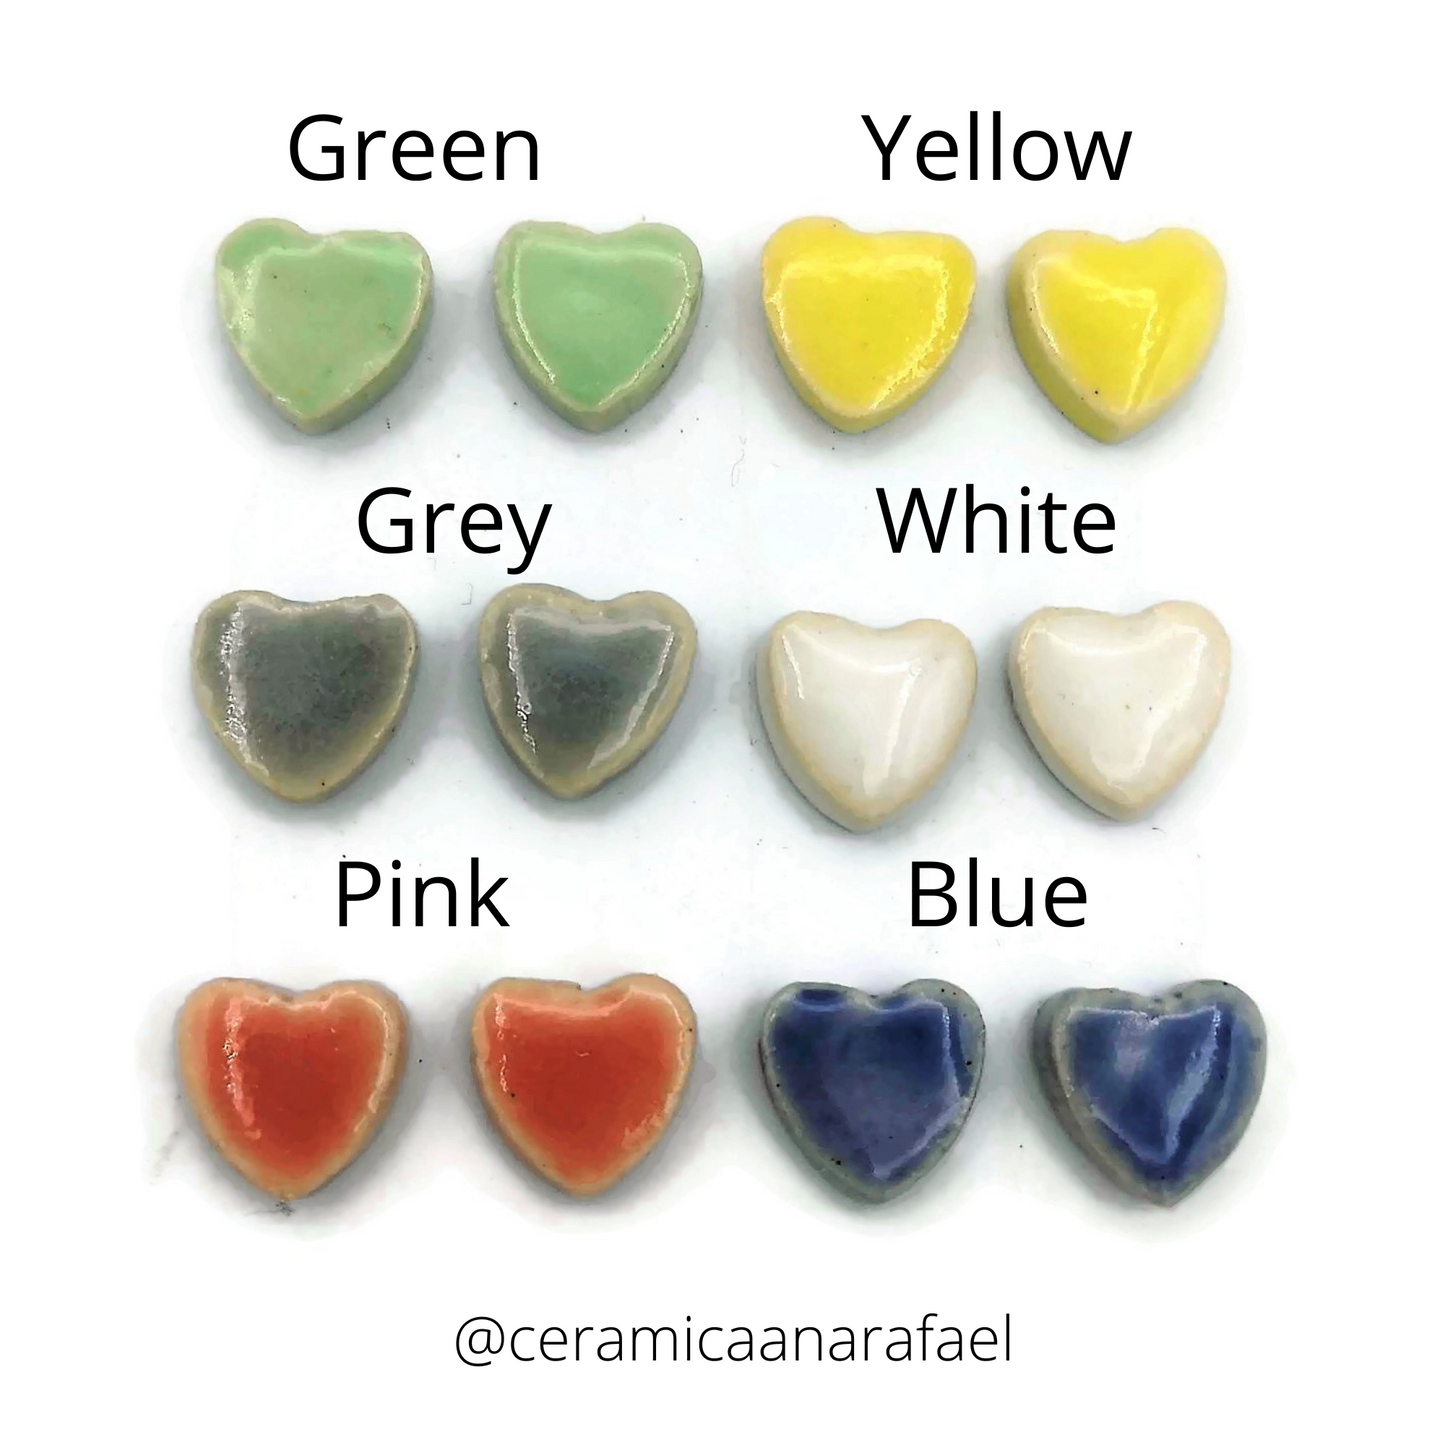 Handmade Ceramic Blue Heart Stud Earrings For Women, Minimalist Novelty Small Dainty Earrings, Best Gifts For Her On Valentines Day - Ceramica Ana Rafael